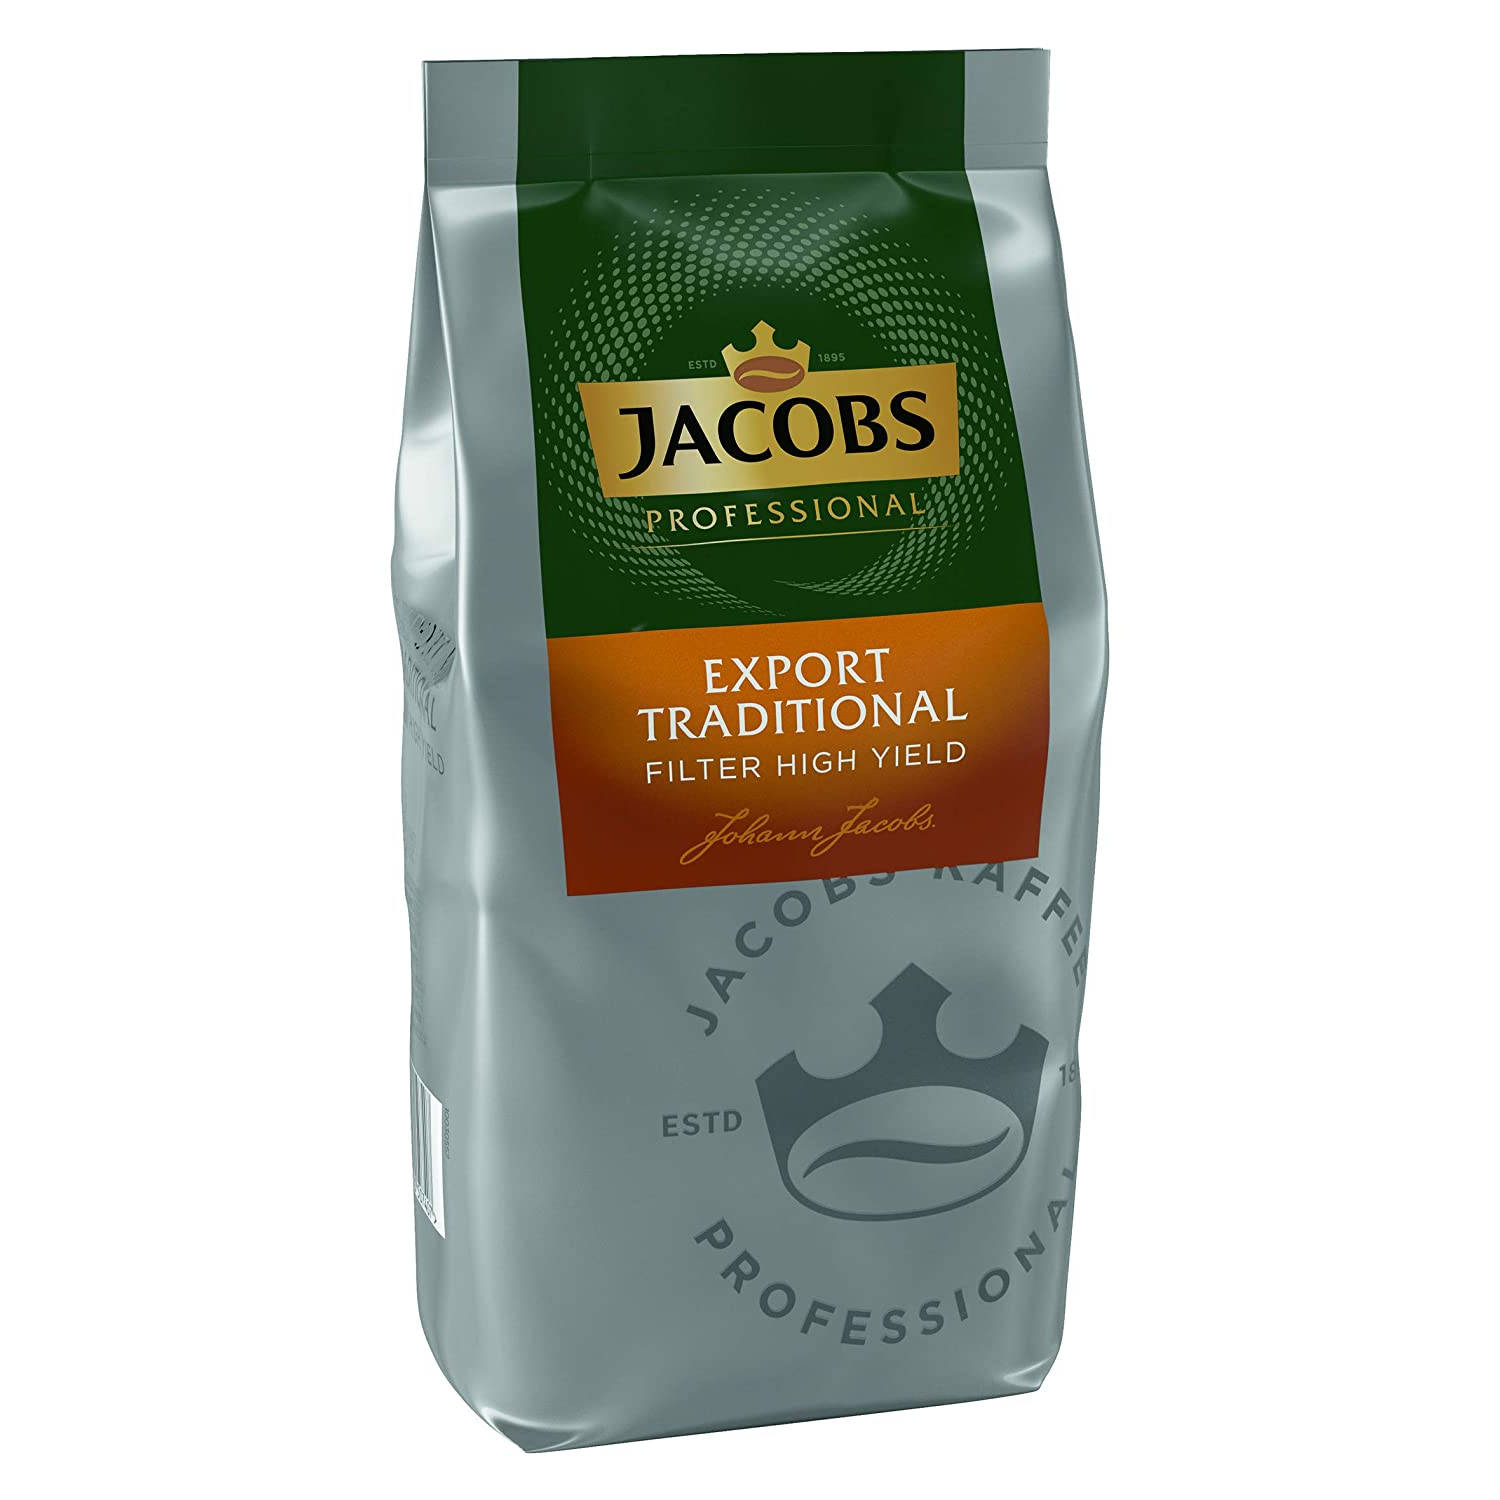 Professional Filter-Kaffeemaschinen) professionelle Export HY JACOBS French (Filter, Press, Traditional 10x800 g Filterkaffee